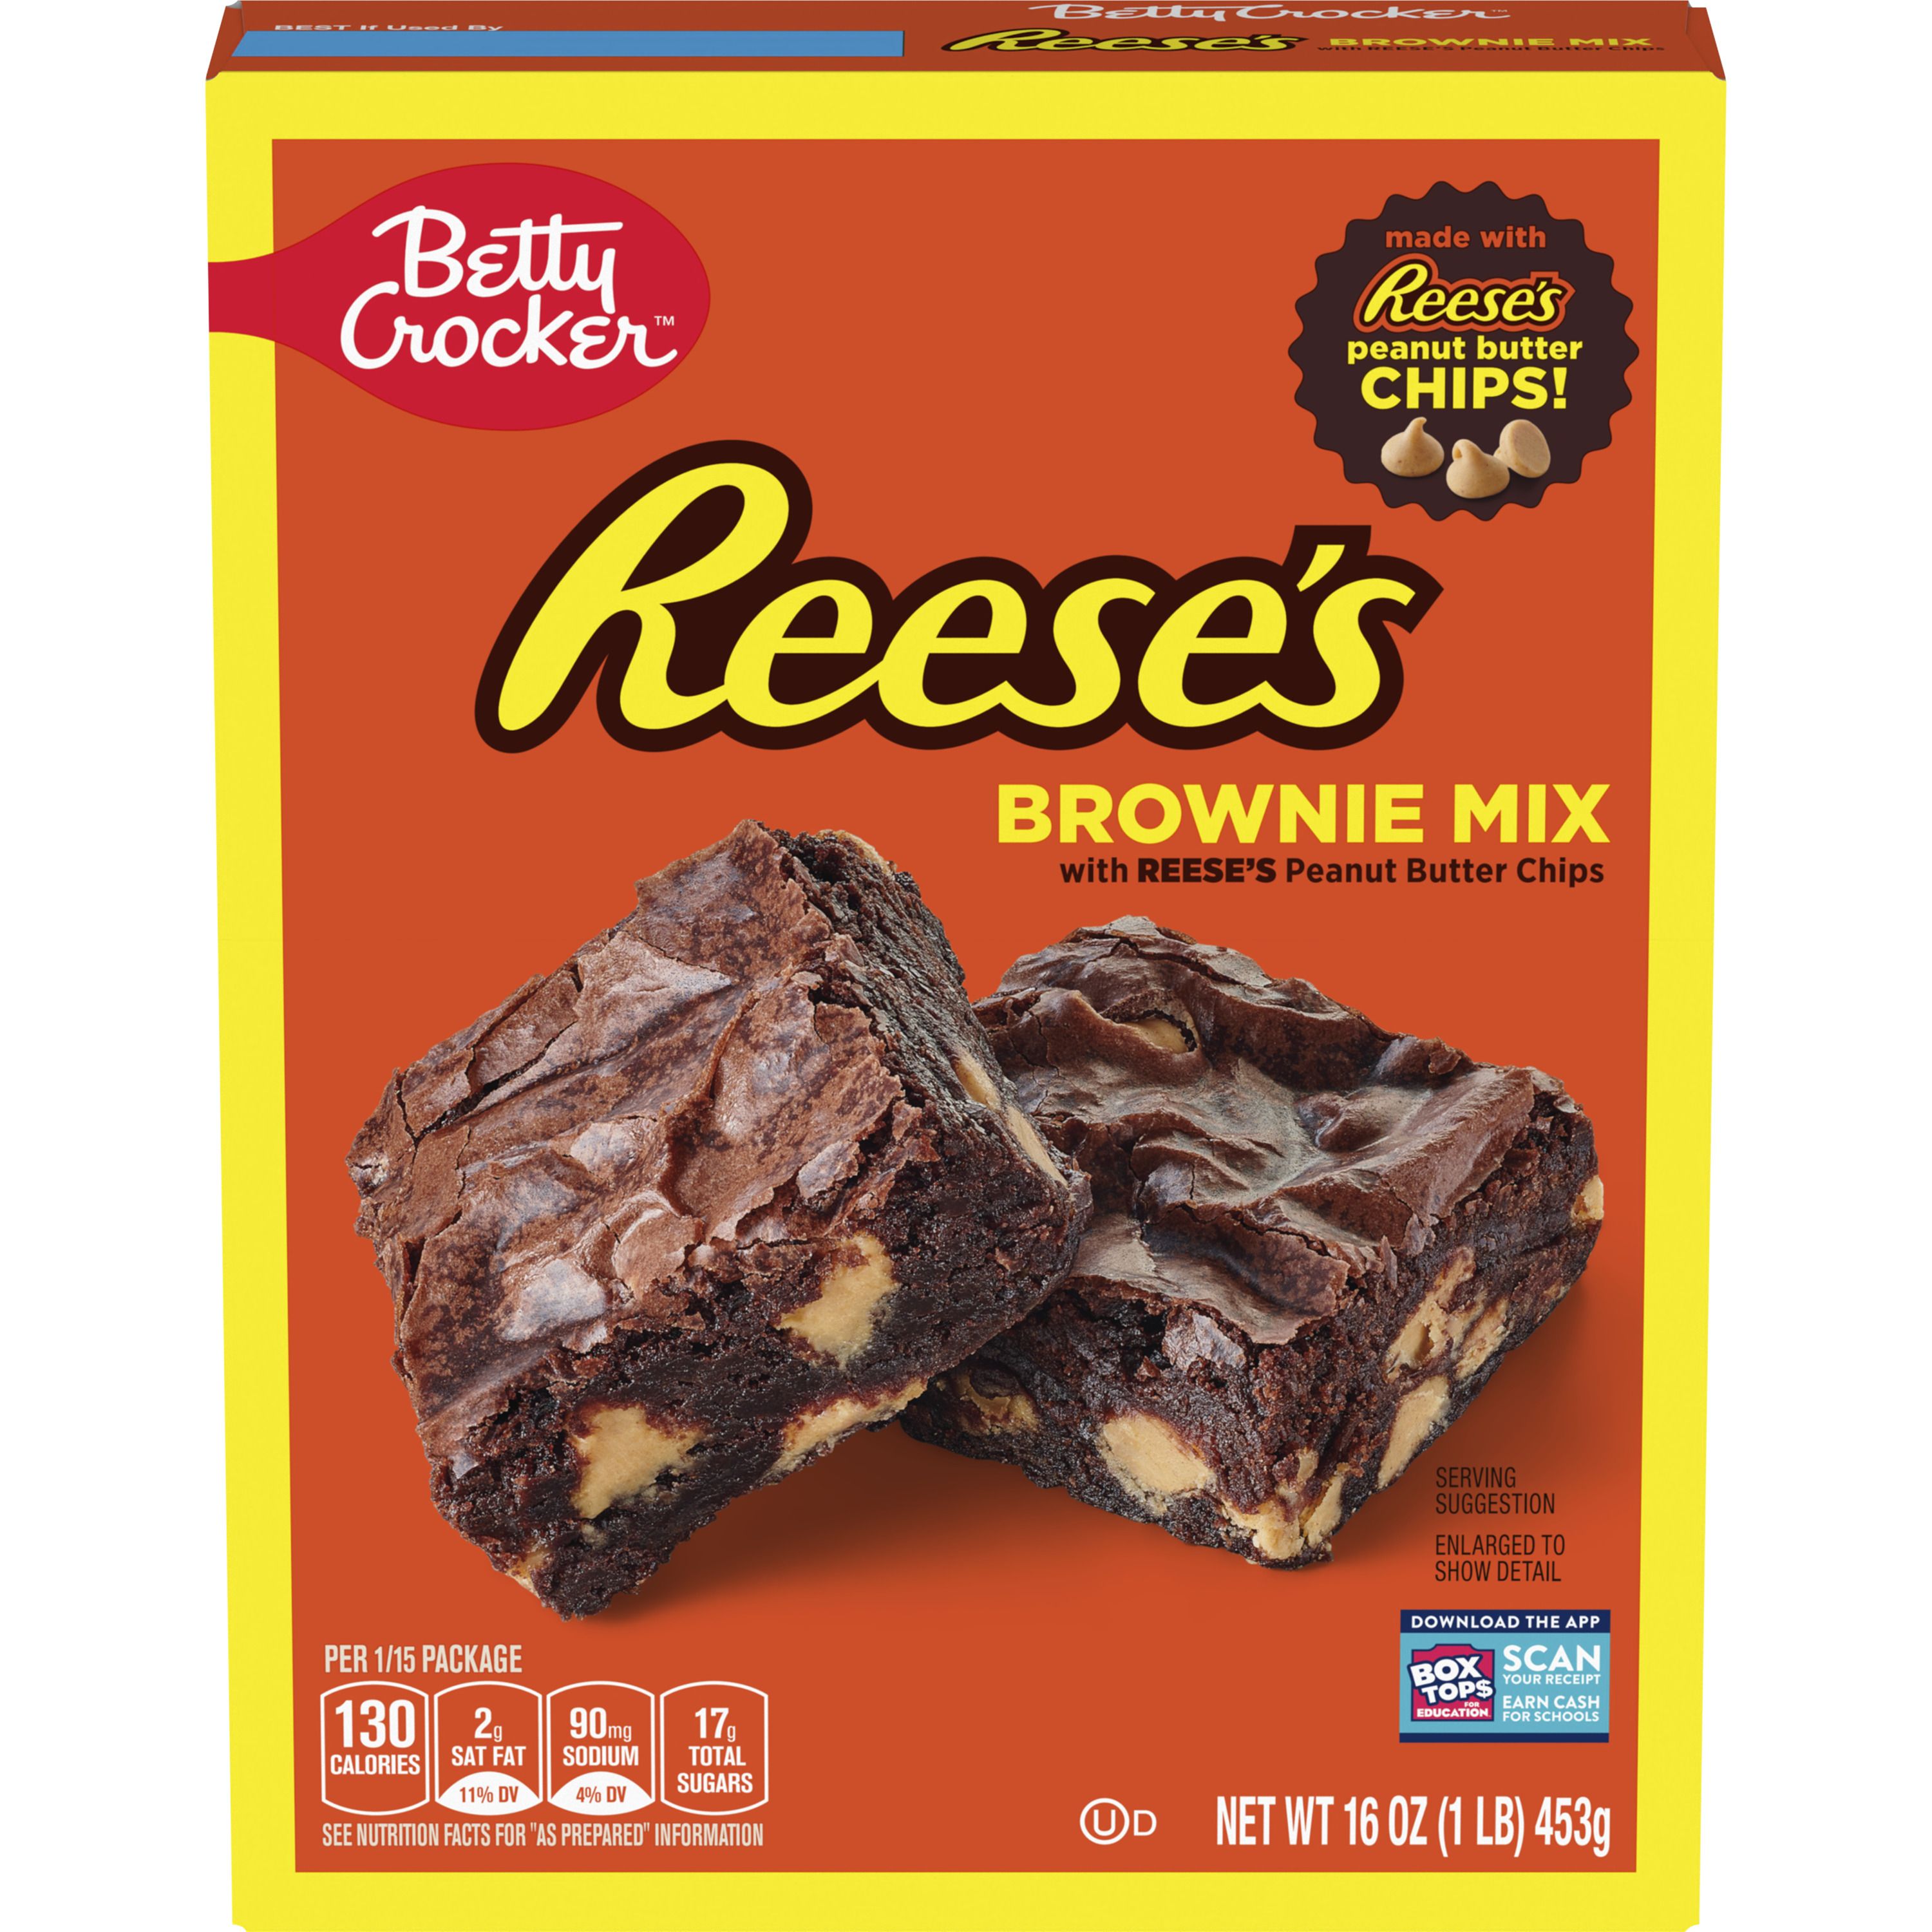 Betty Crocker REESE'S Brownie Mix With REESE’S Peanut Butter Chips, 16 oz - Front